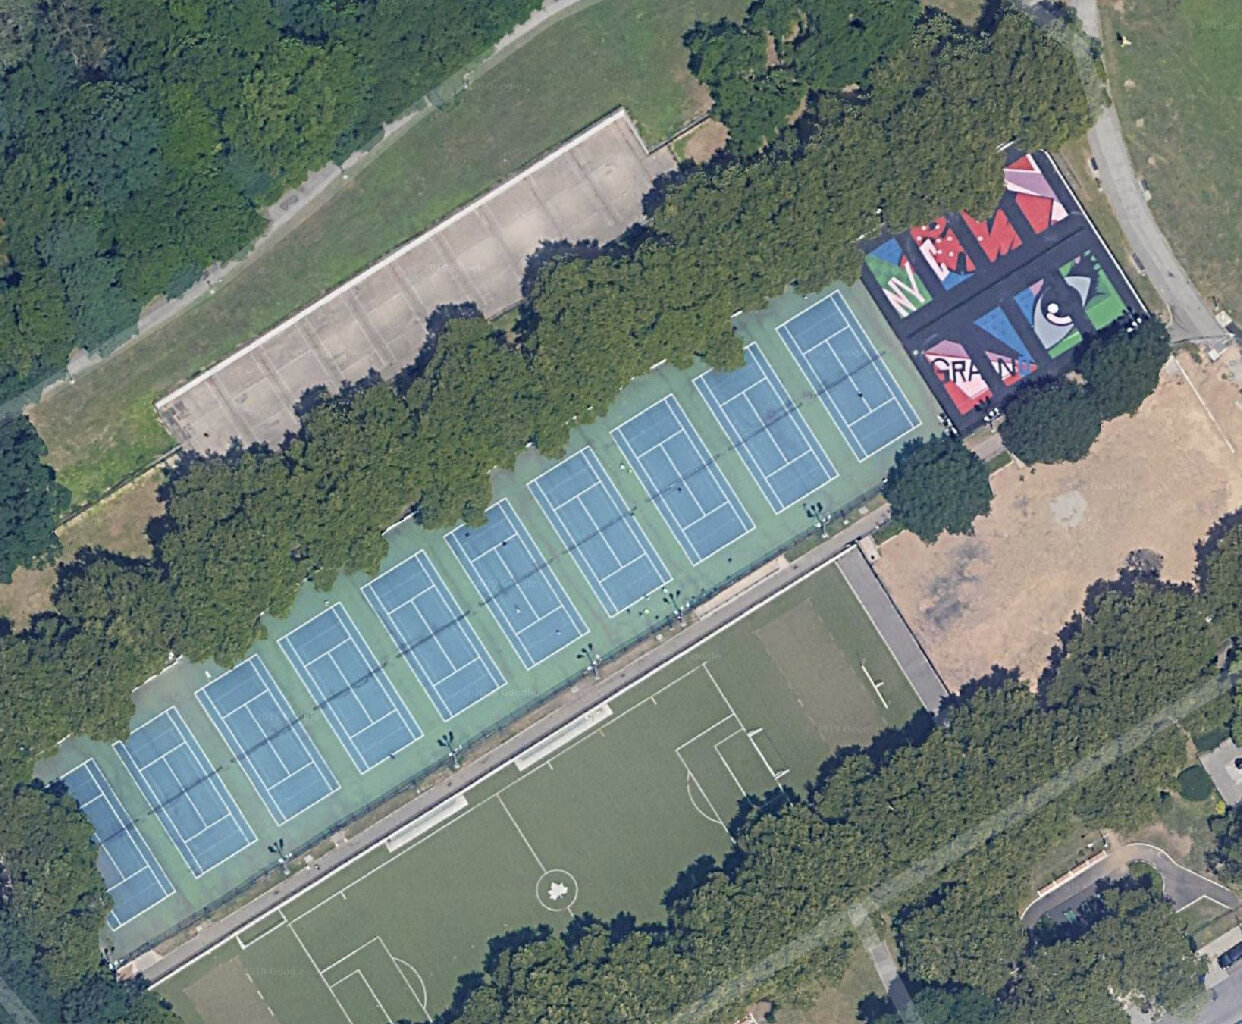 Overhead view of our Courts